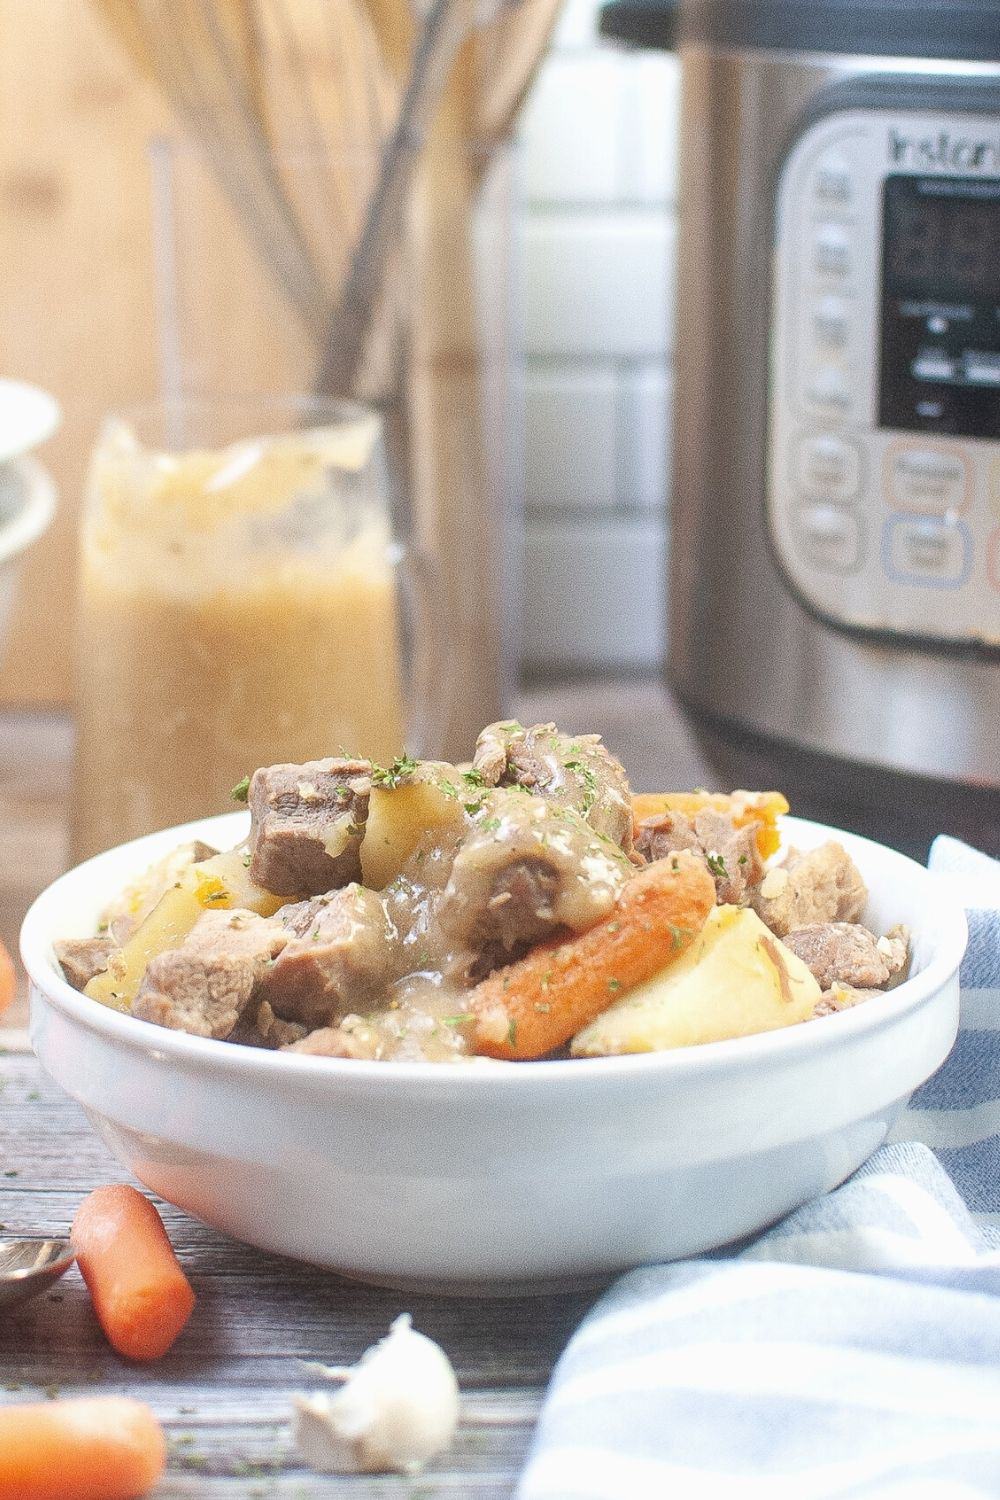 white bowl of pressure cooker pork roast, carrots, and potatoes in front of an instant pot